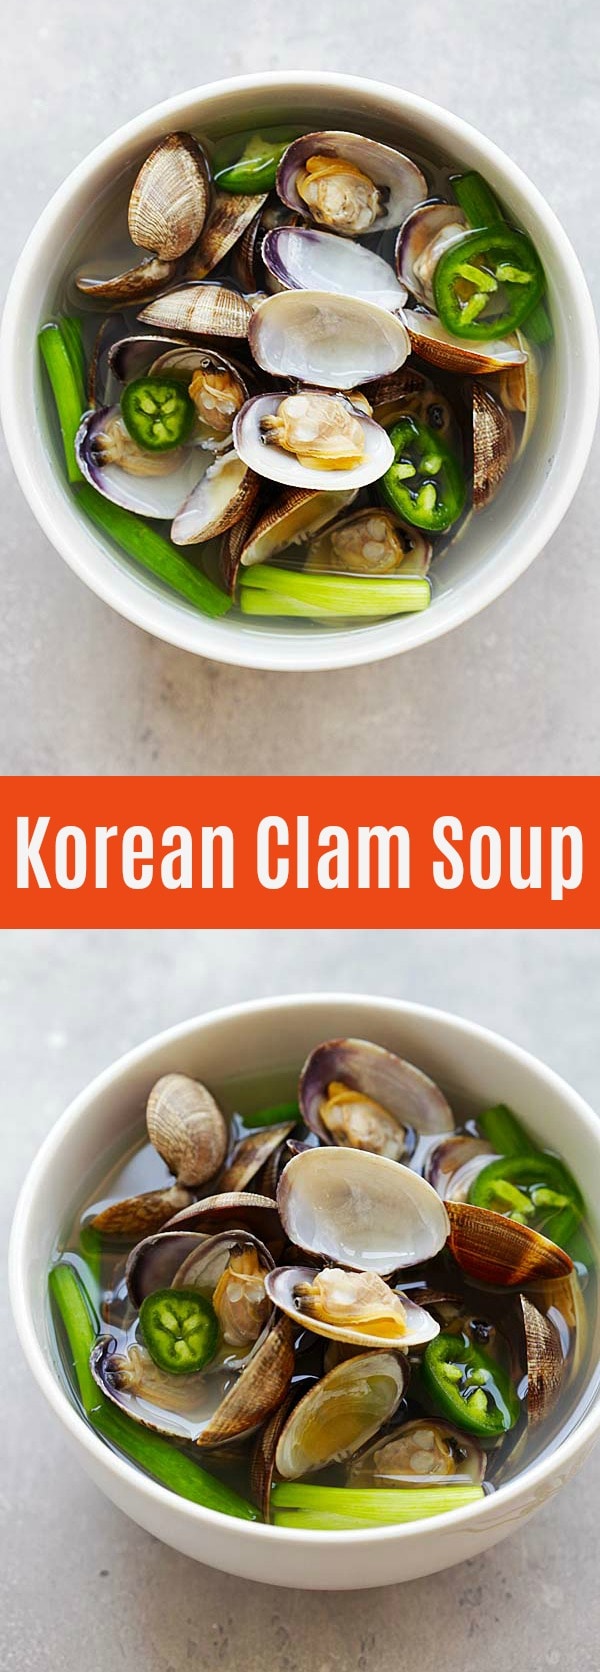 Korean Clam Soup - savory and briny clam soup with jalapeno and garlic. Easy recipe that takes only 10 minutes to make and so delicious | rasamalaysia.com